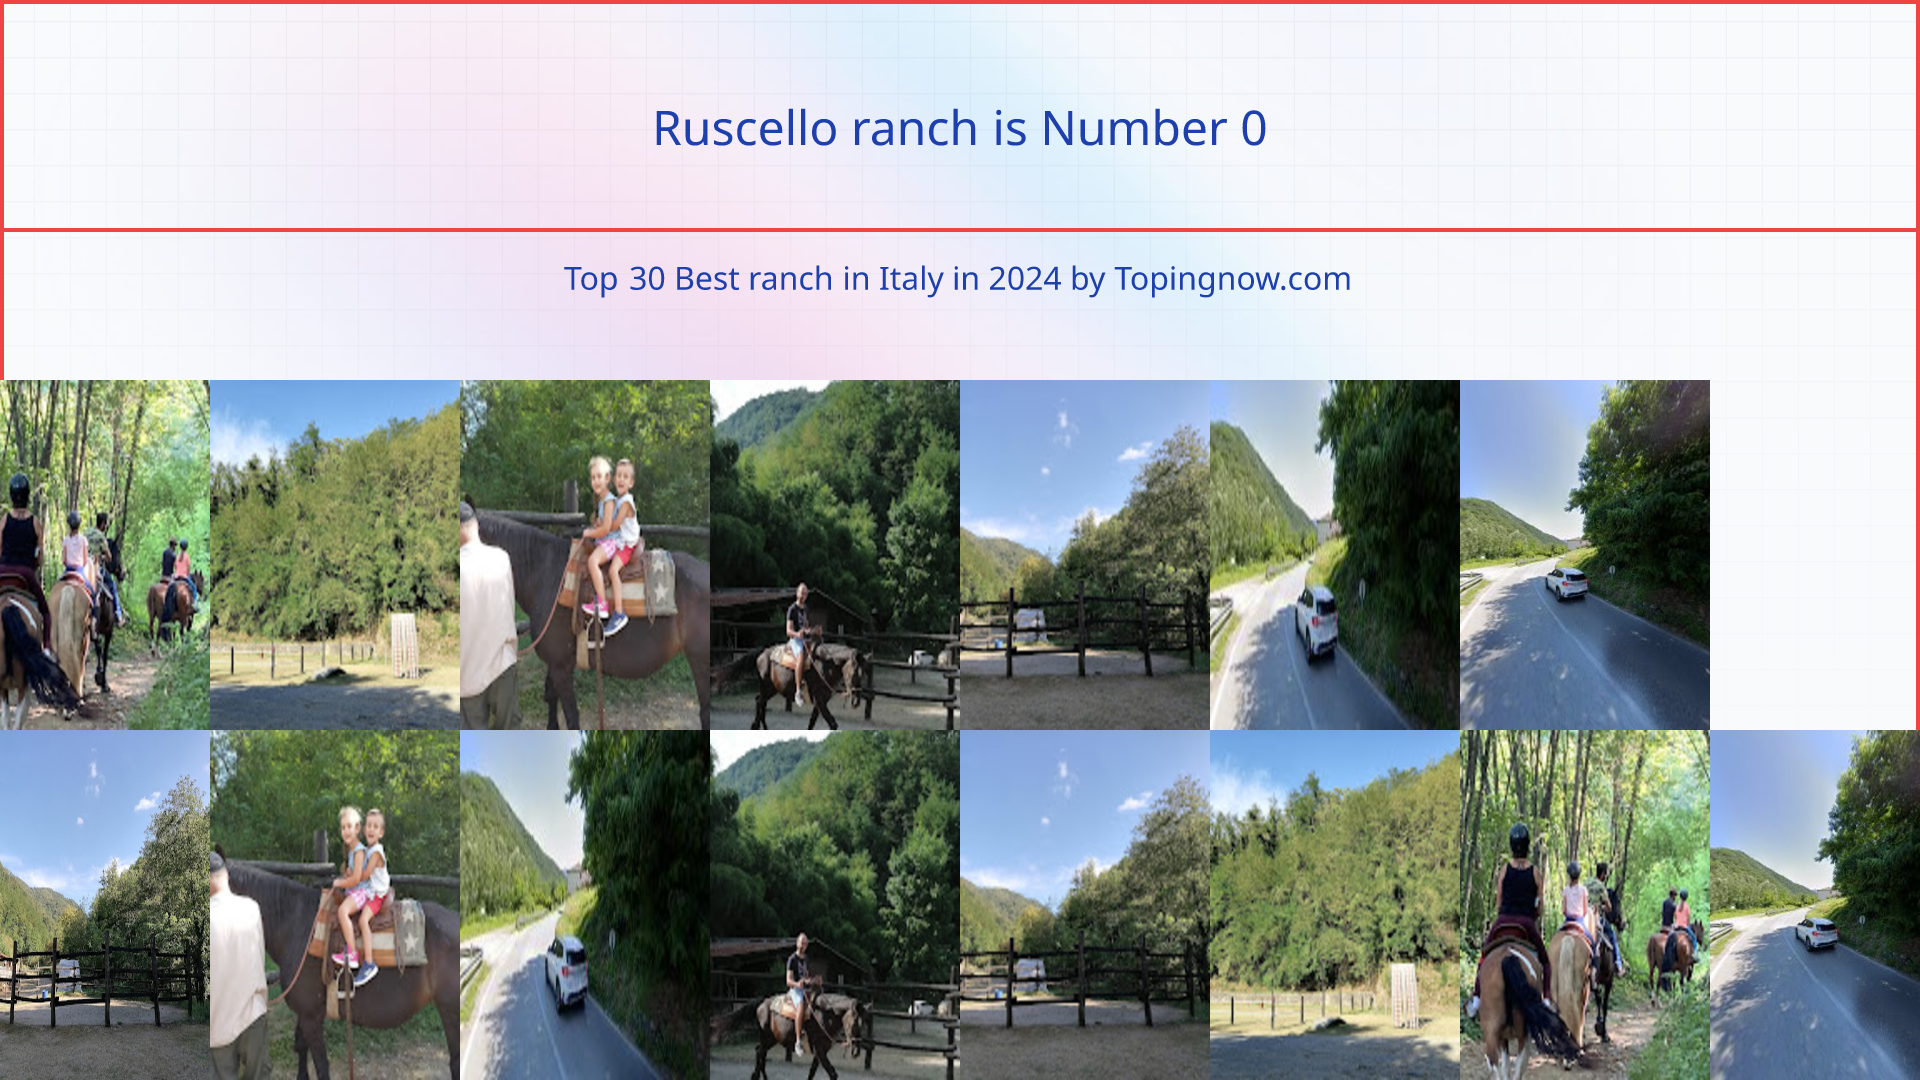 Ruscello ranch: Top 30 Best ranch in Italy in 2024